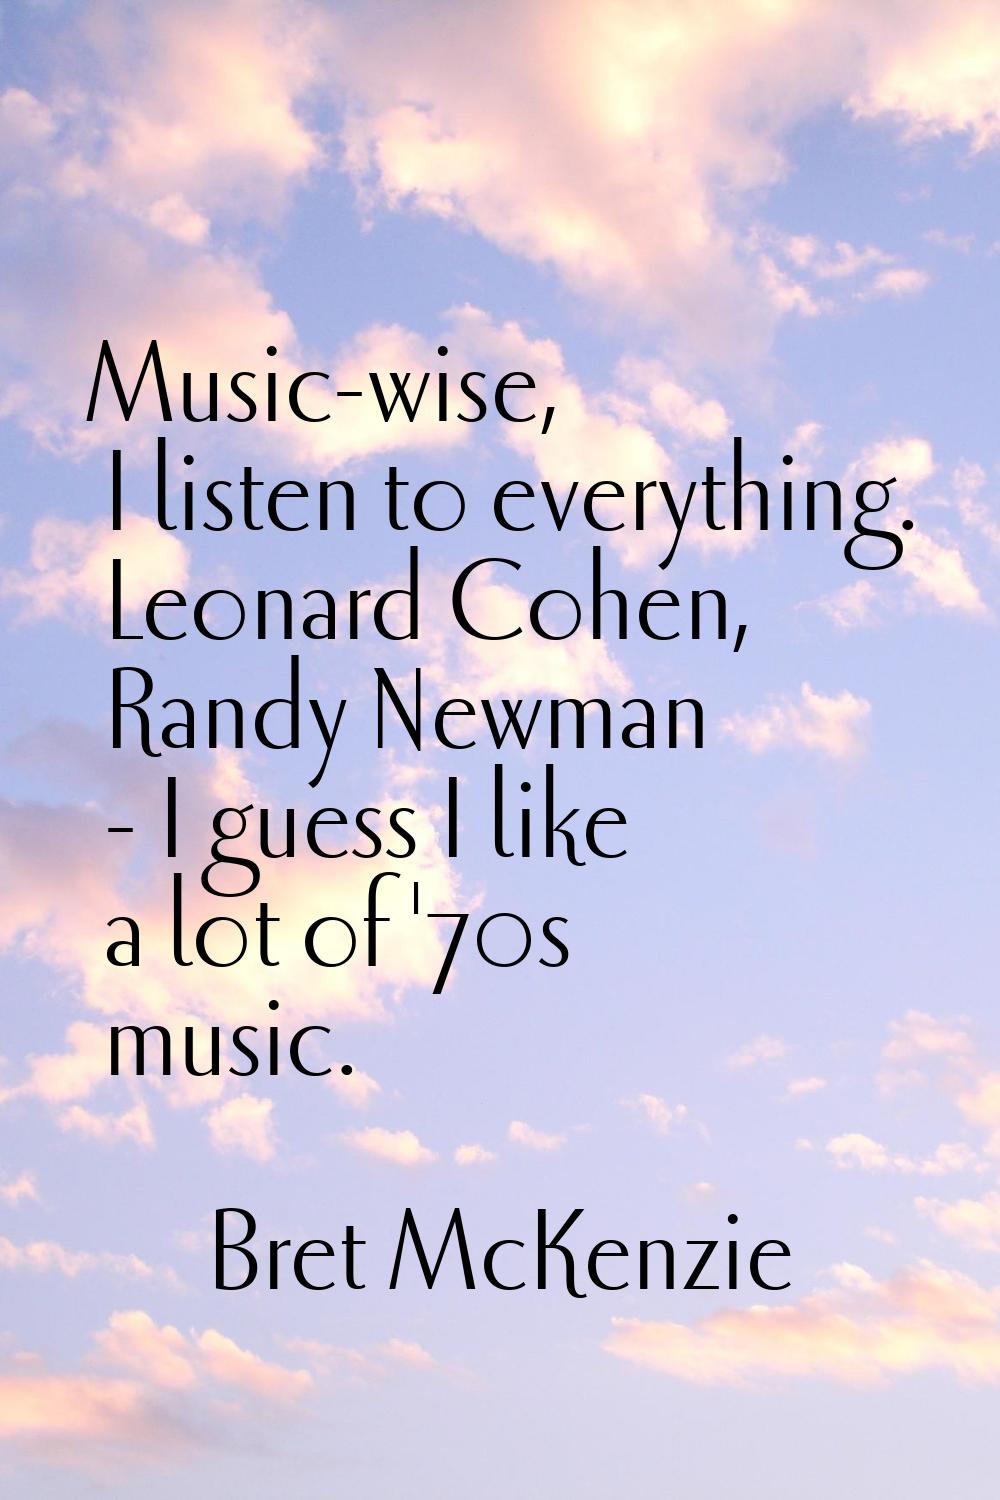 Music-wise, I listen to everything. Leonard Cohen, Randy Newman - I guess I like a lot of '70s musi